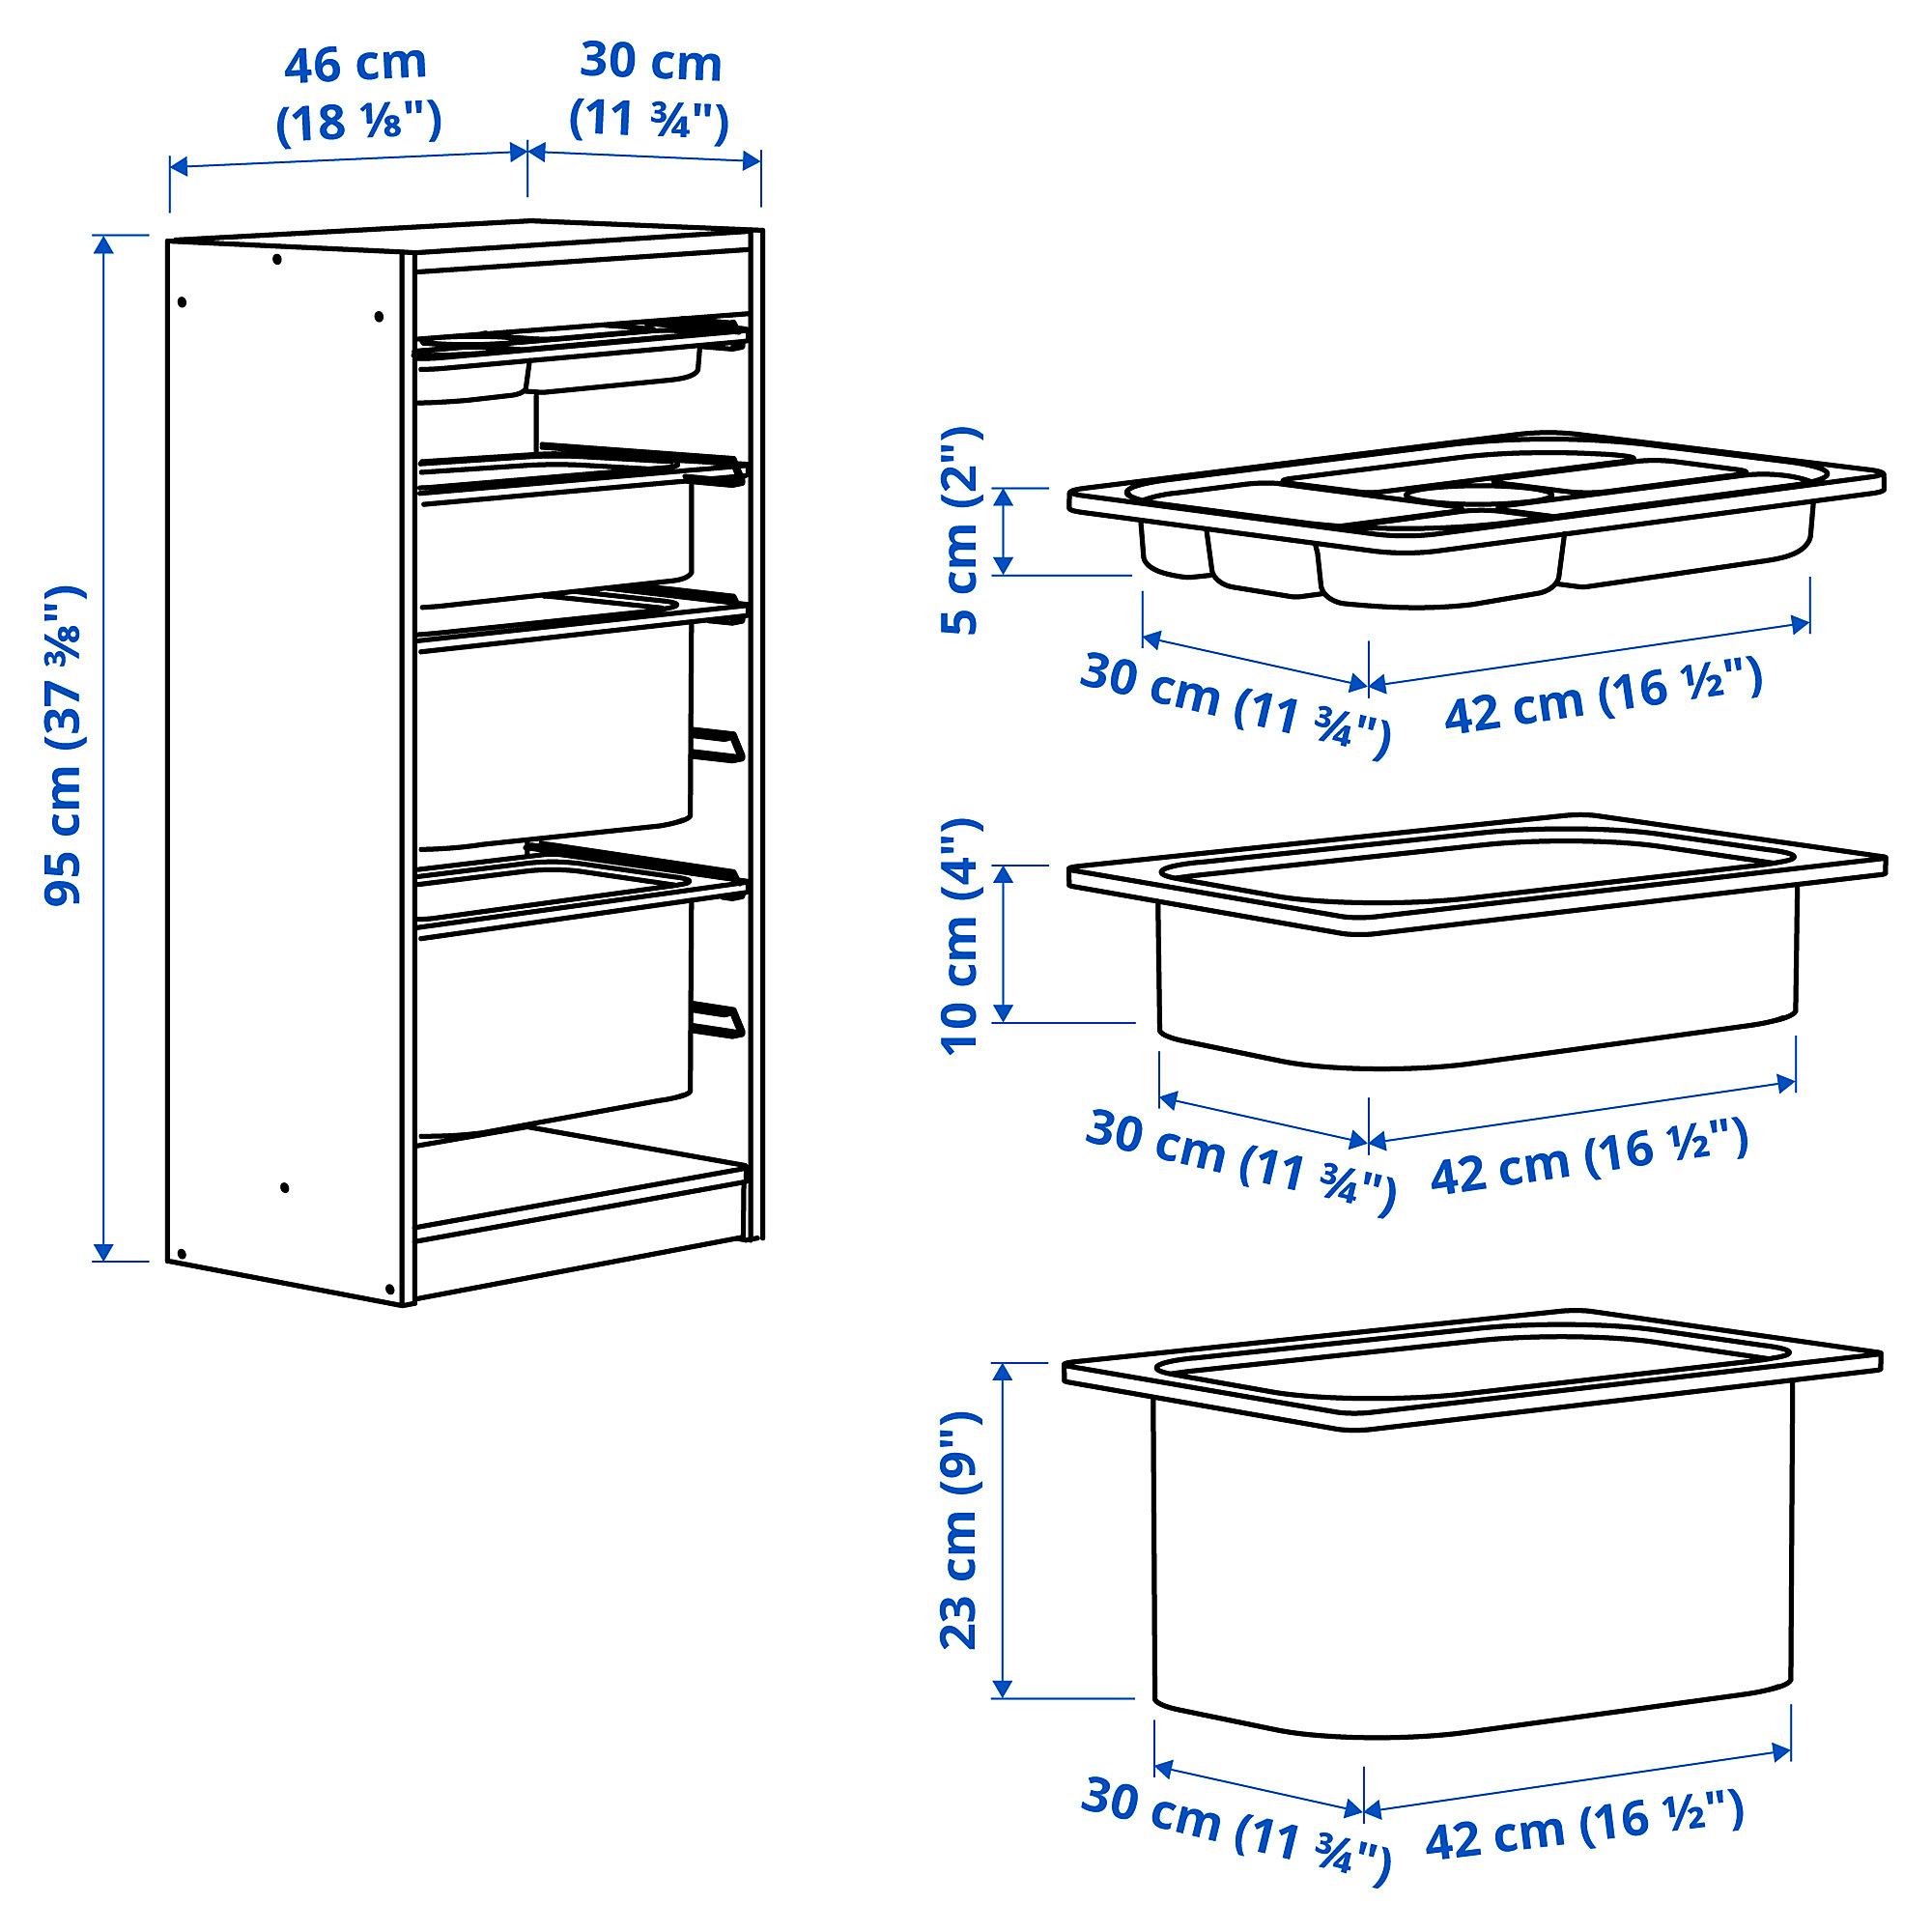 TROFAST storage combination with boxes/tray